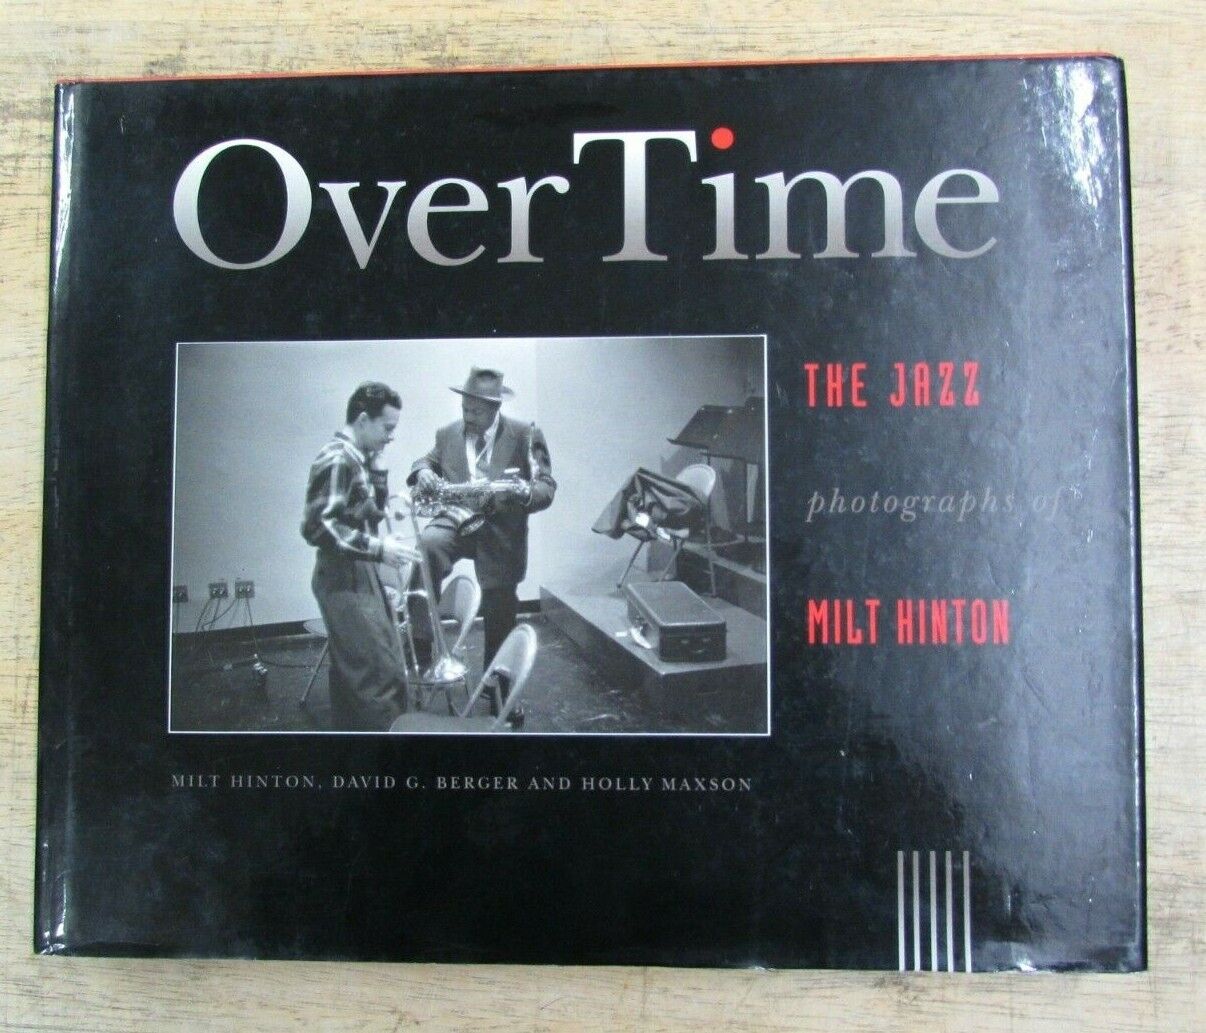 *SIGNED* OVER TIME THE JAZZ PHOTOGRAPHS OF MILT HINTON -H/B D/W - £3.25 UK POST